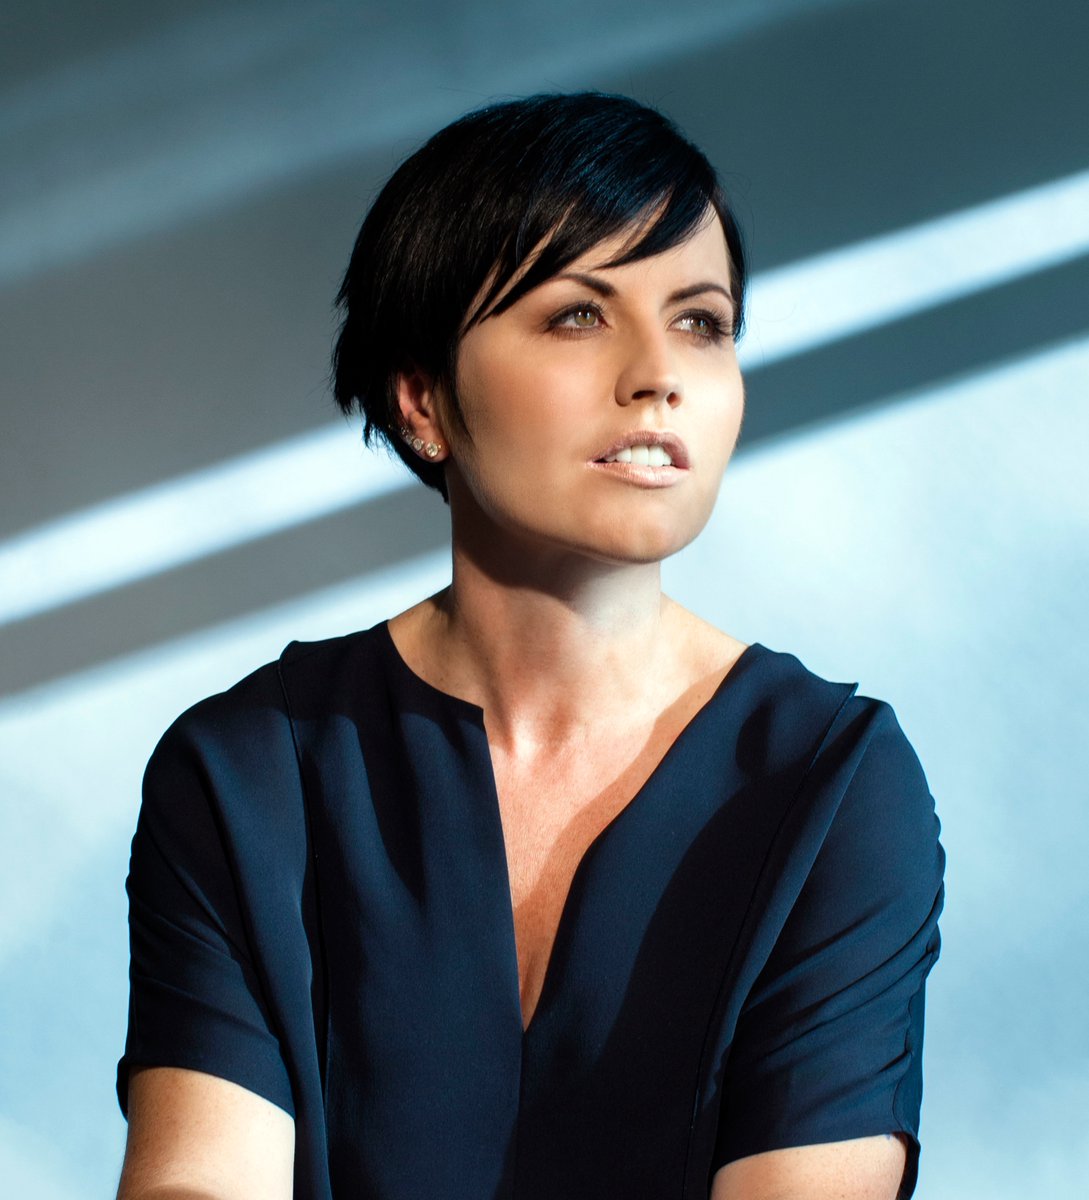 'People don't look at you singing. They go within themselves and listen. Music is about listening, not looking.'
- Dolores O'Riordan

The amazing & talented #DoloresORiordan, Irish singer, musician, songwriter, front-woman & lyricist for #TheCranberries, passed #OTD 2018 at 46.